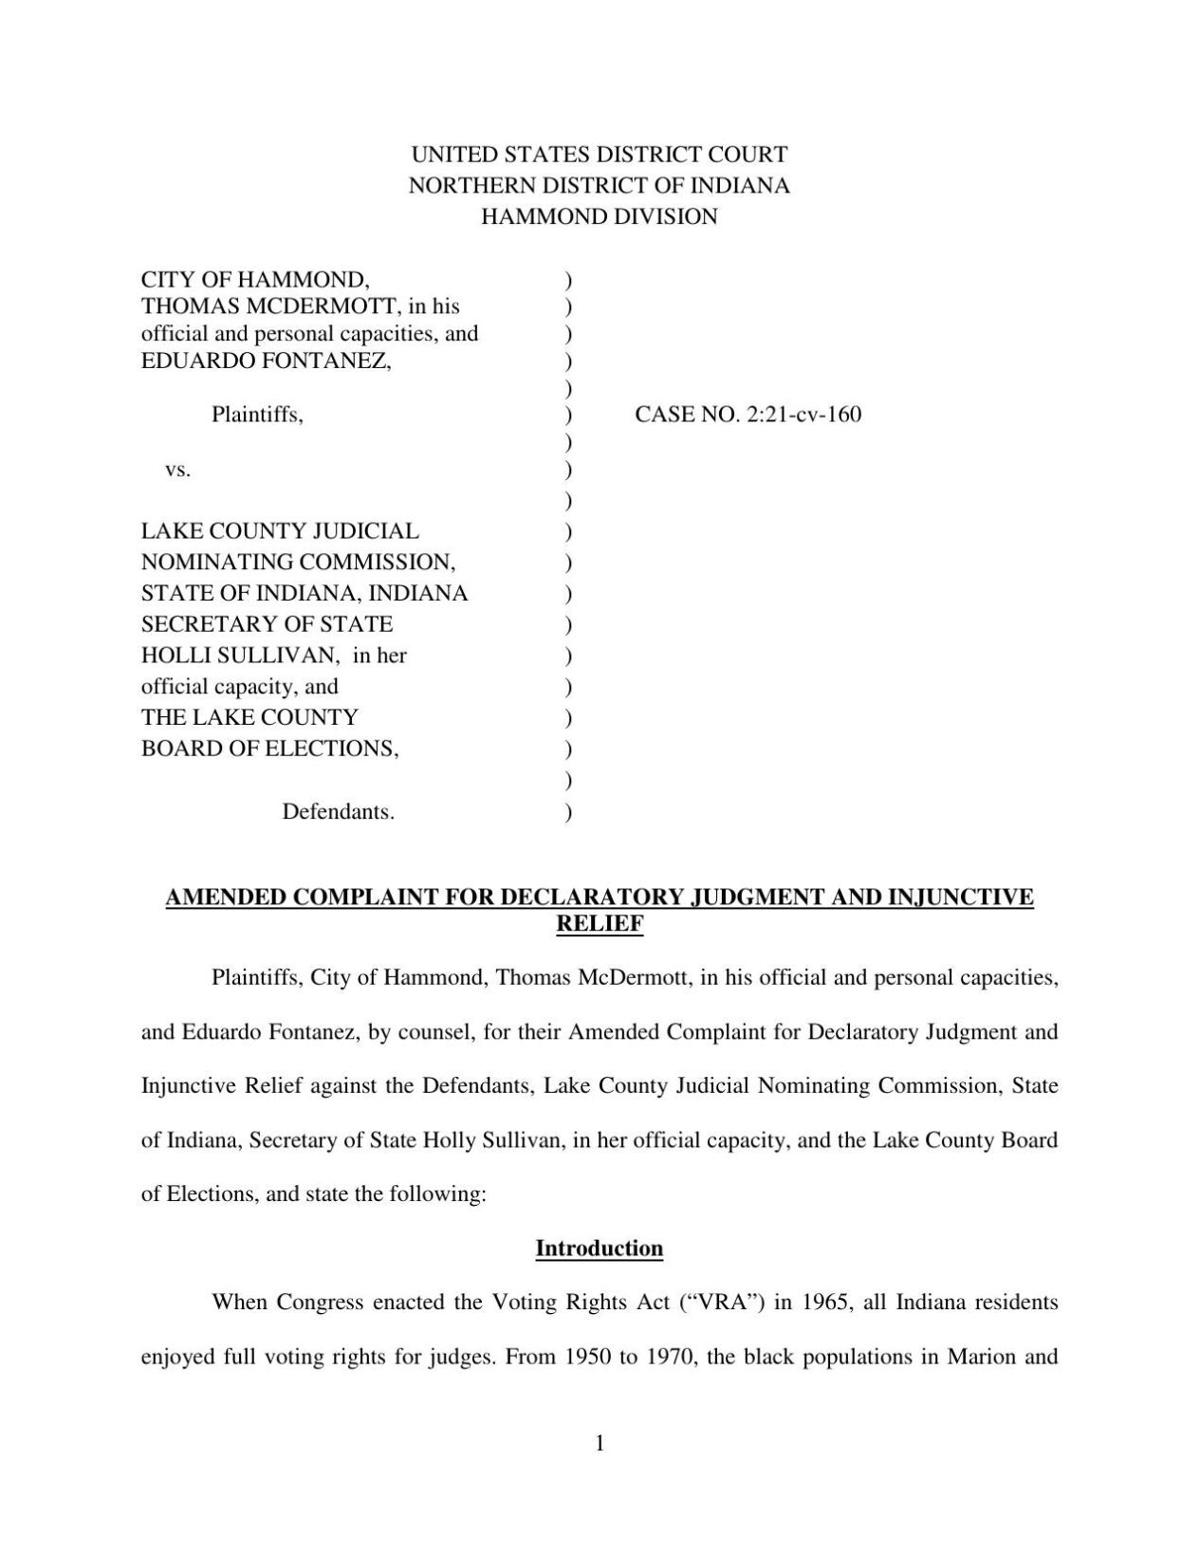 Amended complaint in Hammond v. Lake County Judicial Nominating Commission